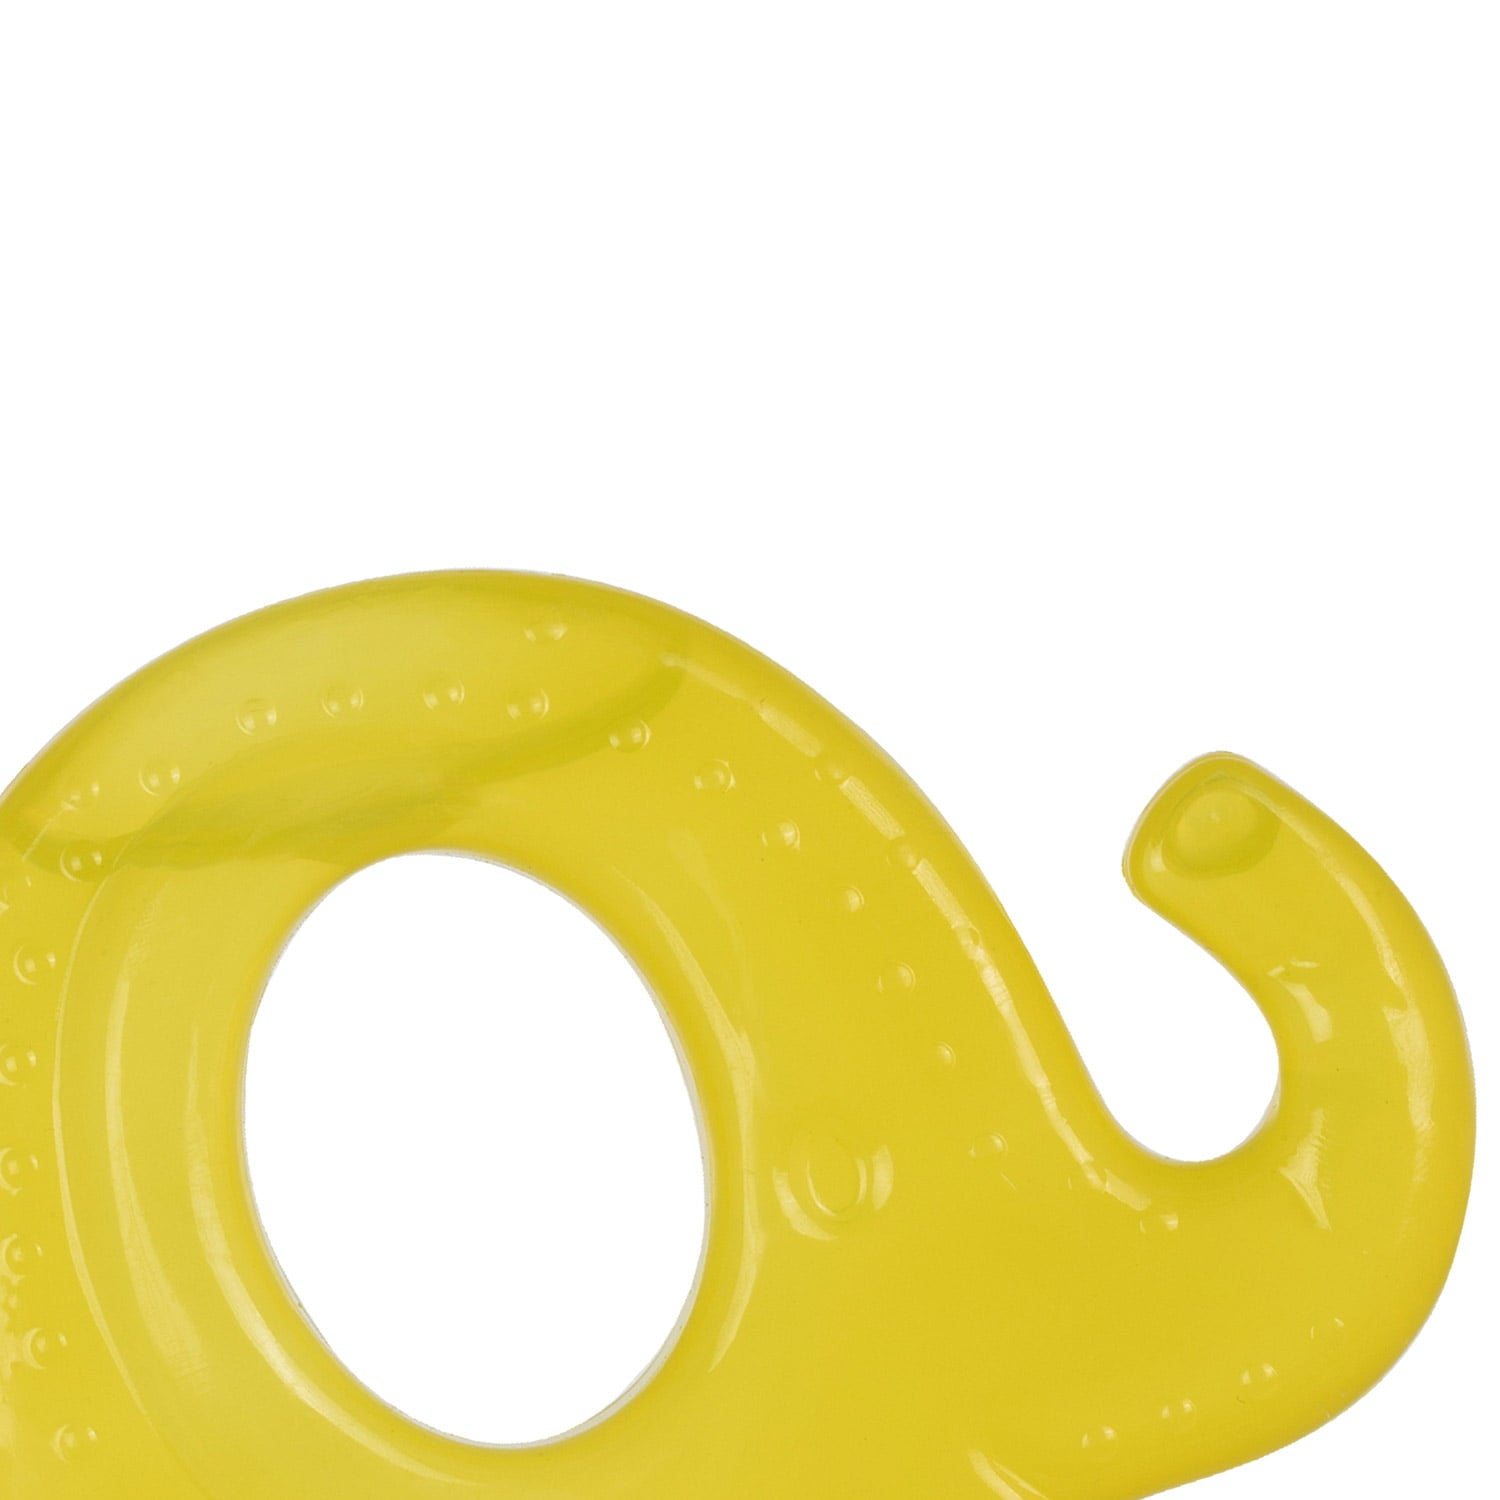 The waterfilled design helps to keep the teether cool for extended periods of time, providing maximum comfort for your little one.